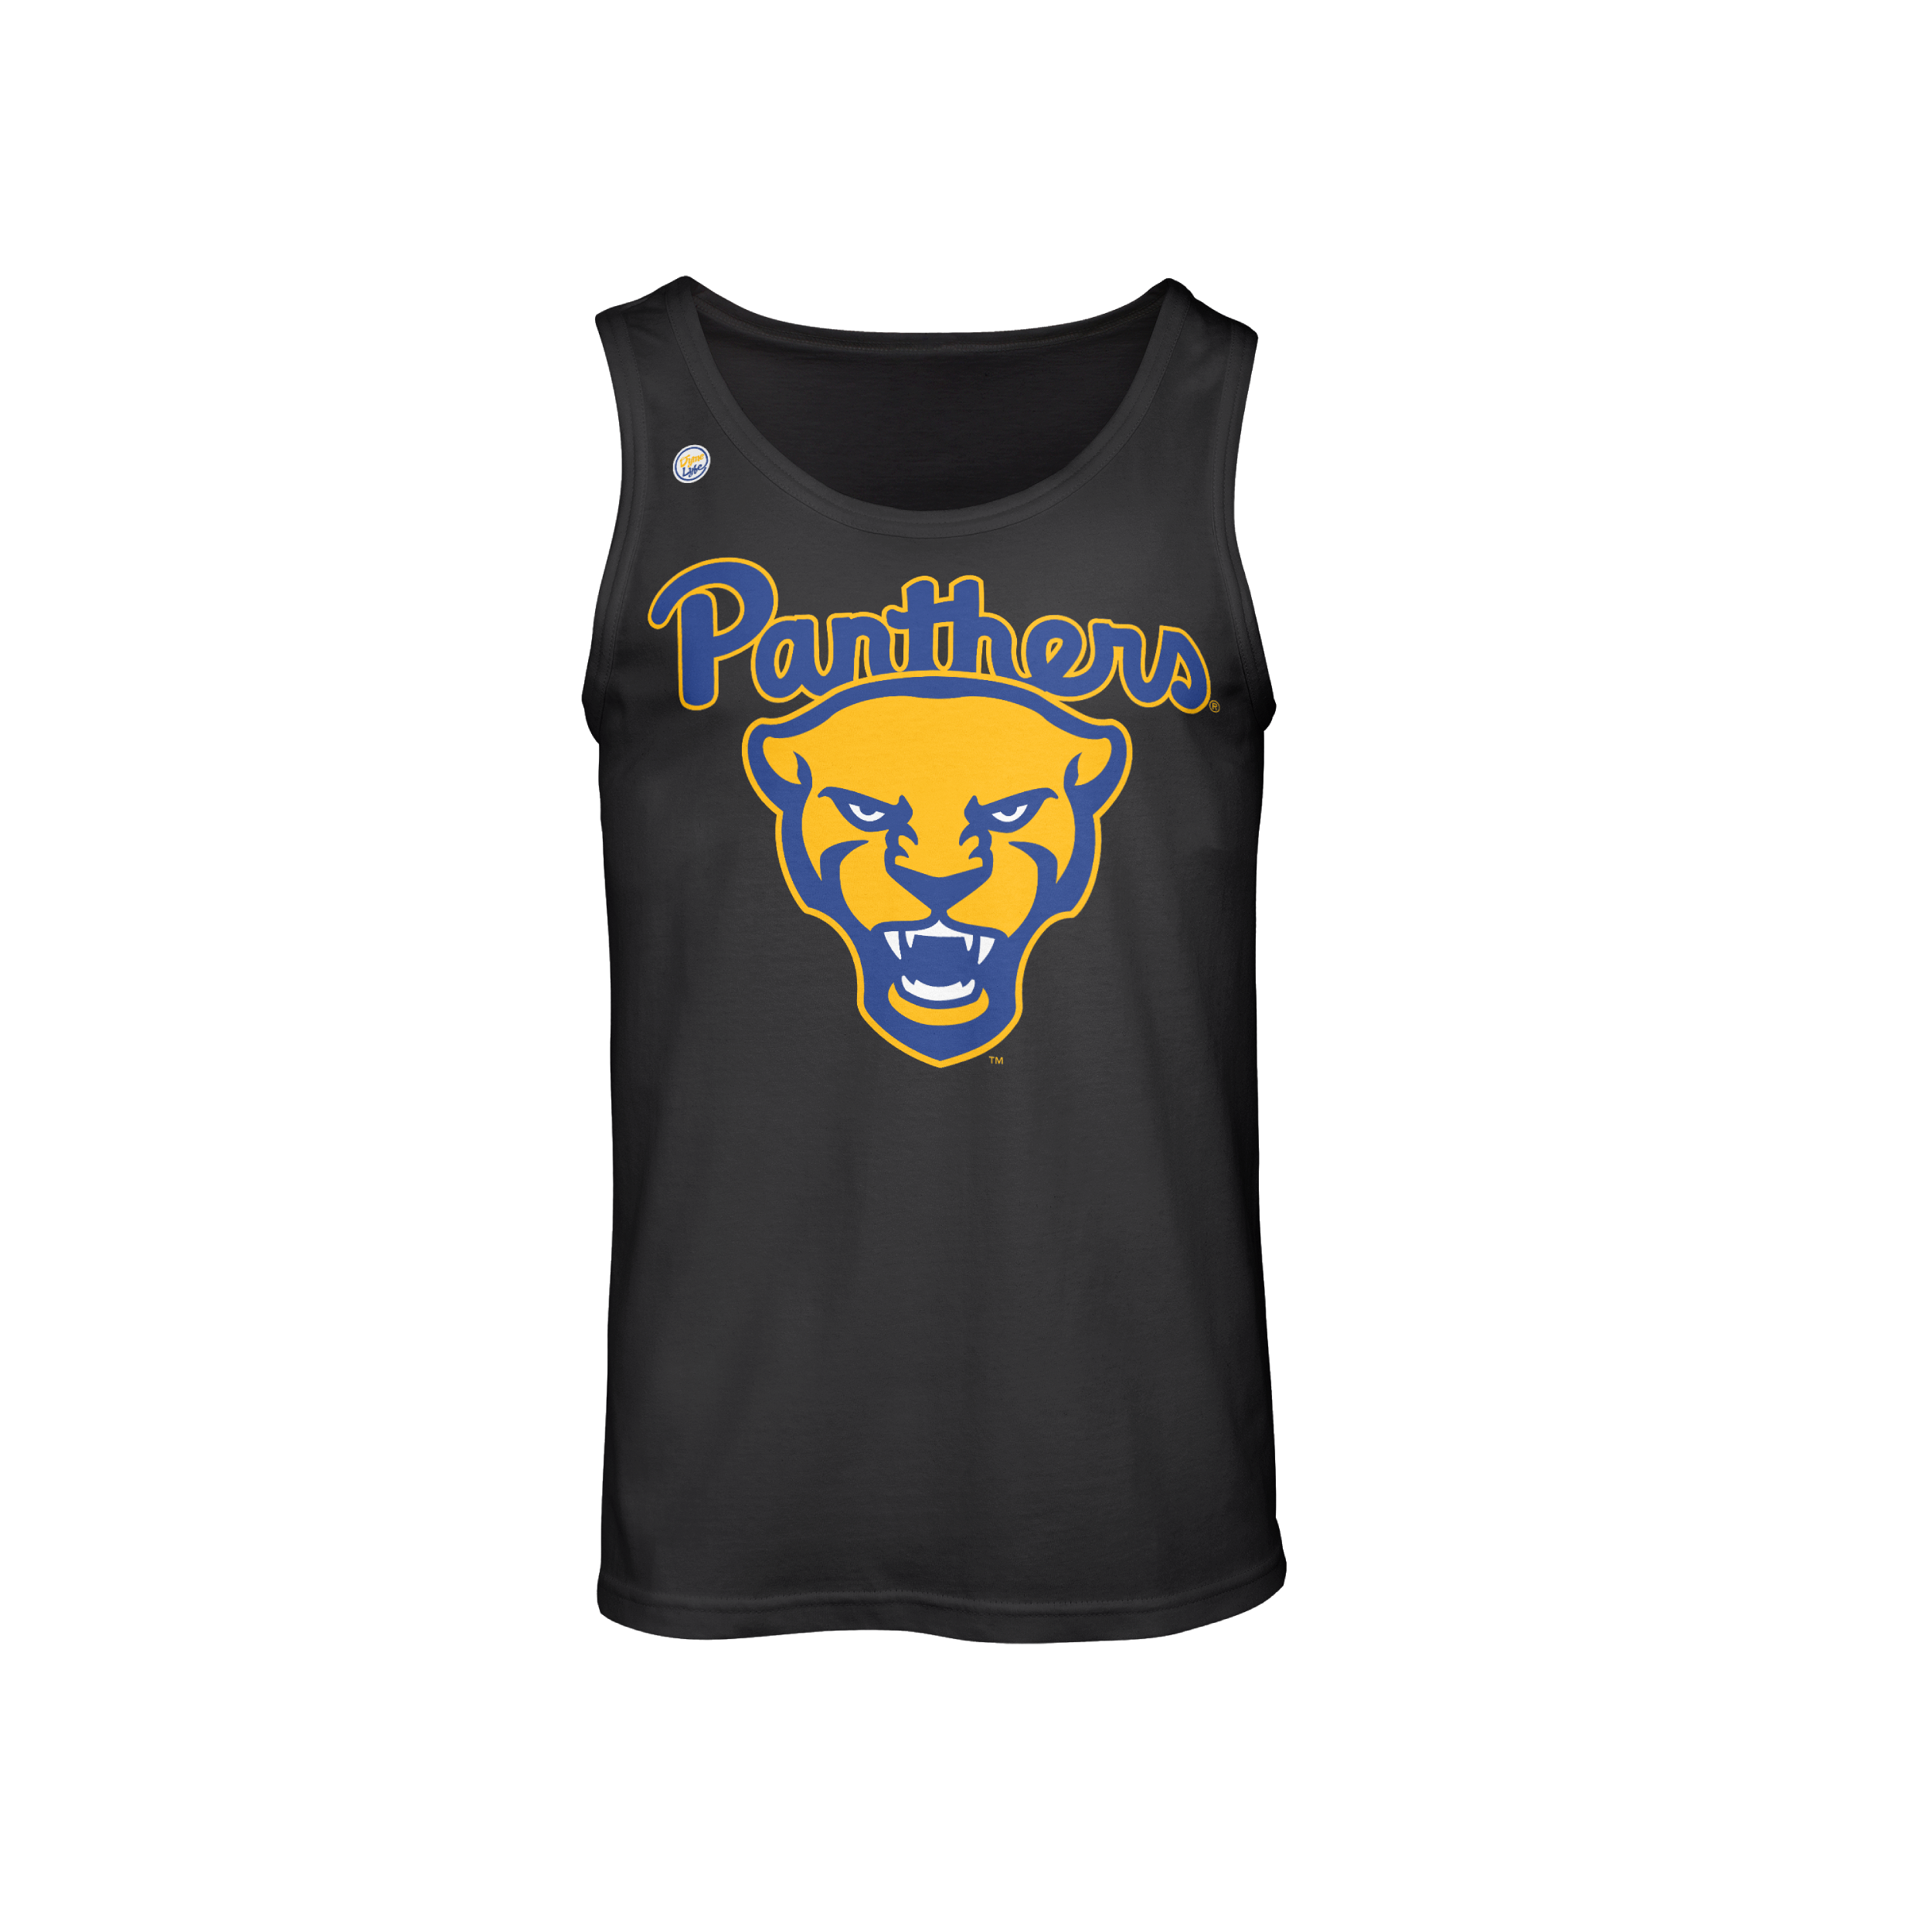 pittsburgh panthers gear